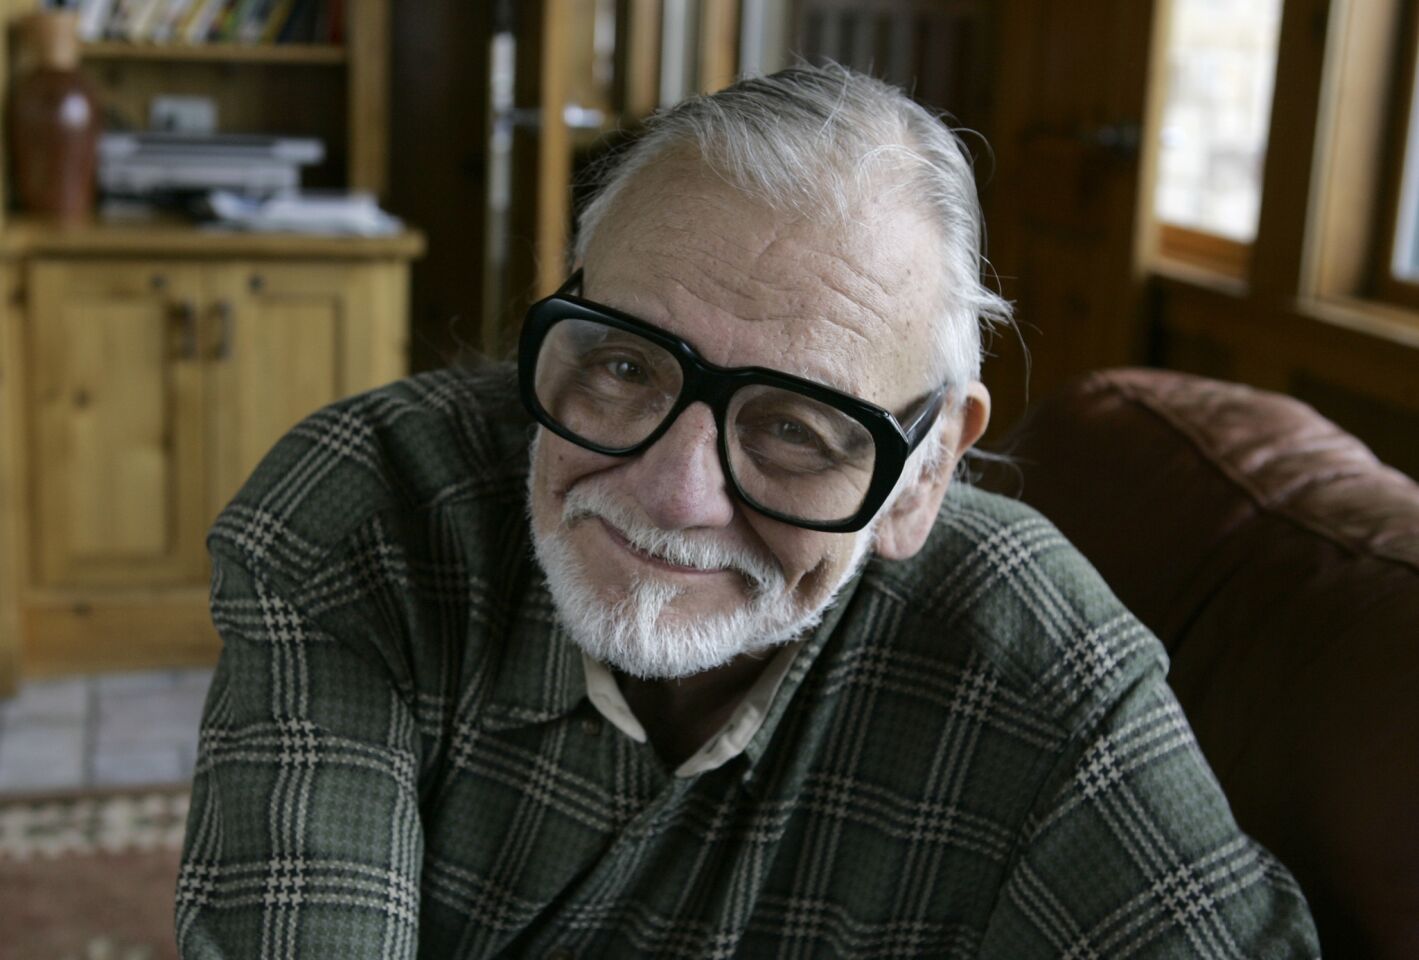 Romero will be remembered best for co-writing and directing “Night of the Living Dead.” The “Living Dead” franchise went on to create a subgenre of horror movies whose influence across the decades has endured, seen in films like “The Purge” and TV shows such as “The Walking Dead.” He was 77. Full obituary